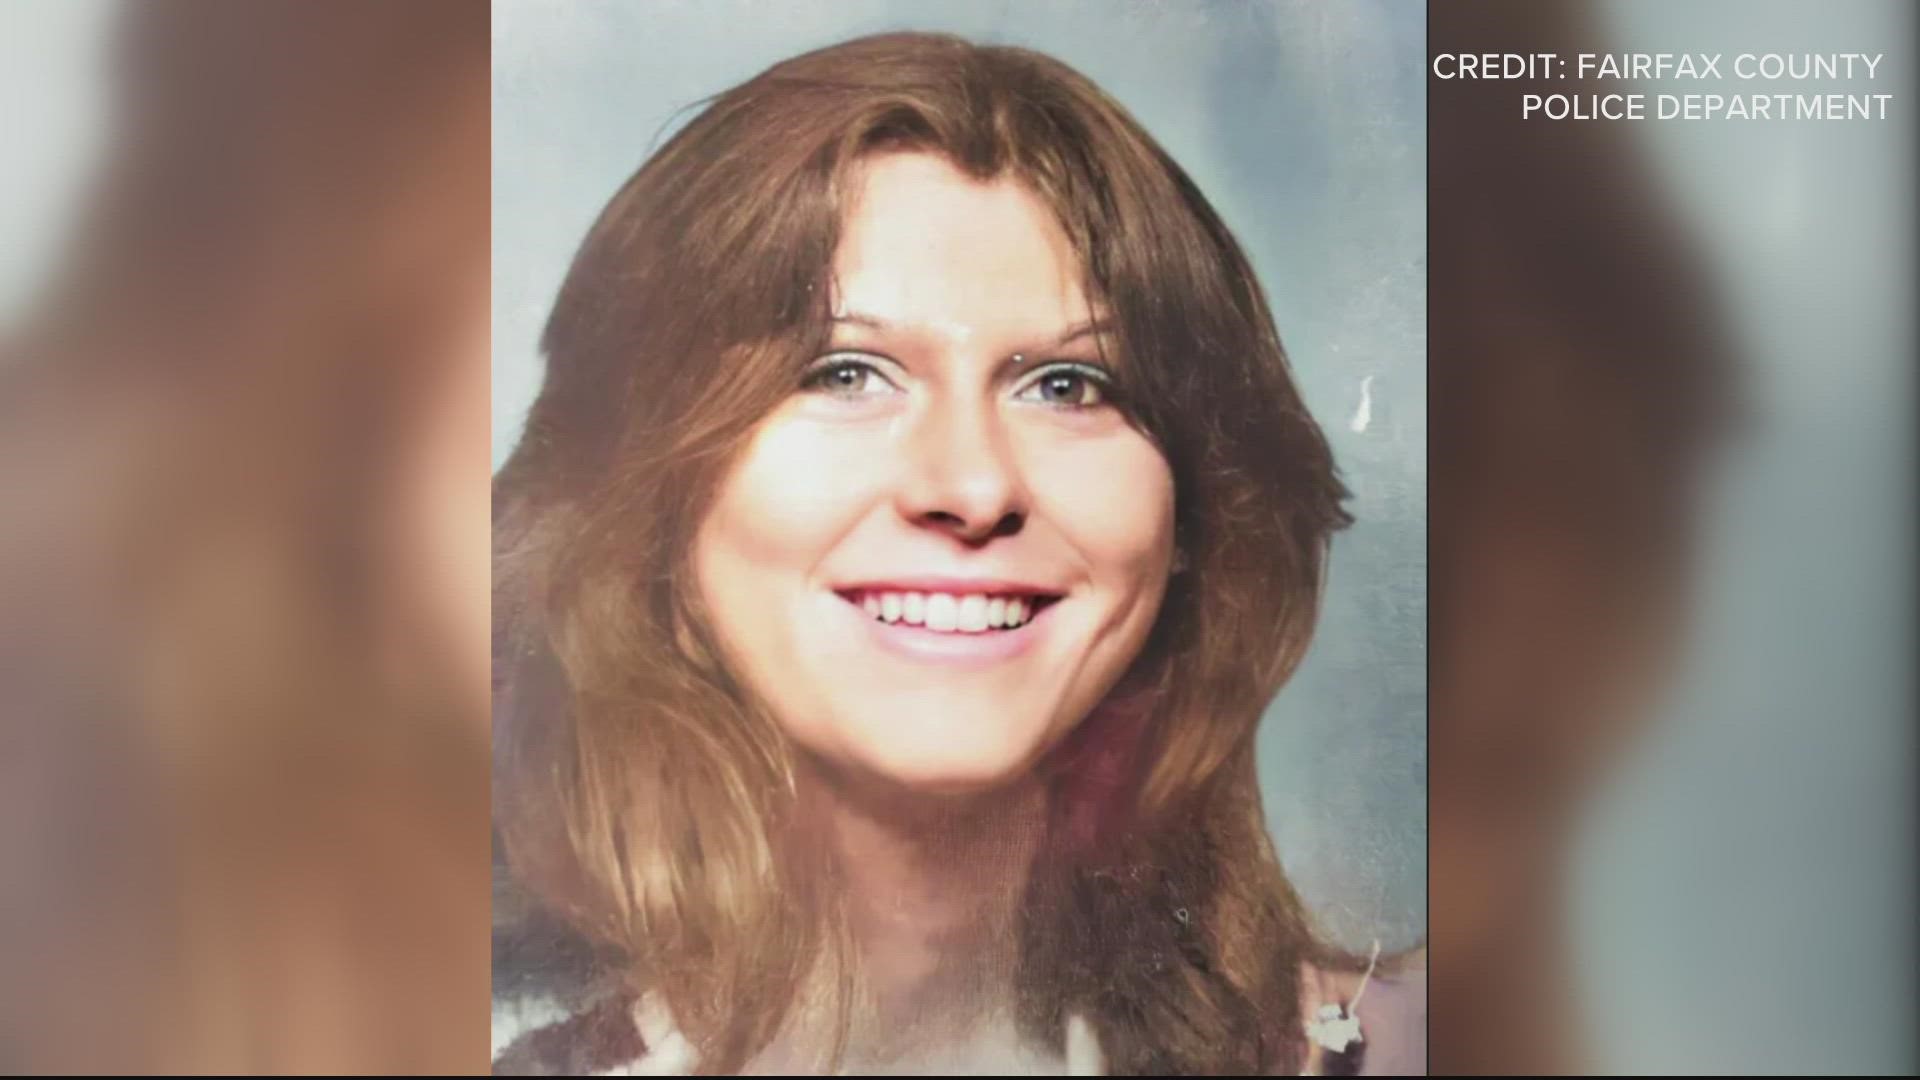 Human remains found near a drainage ditch were identified as a 17-year-old girl last seen in the area in February 1975.